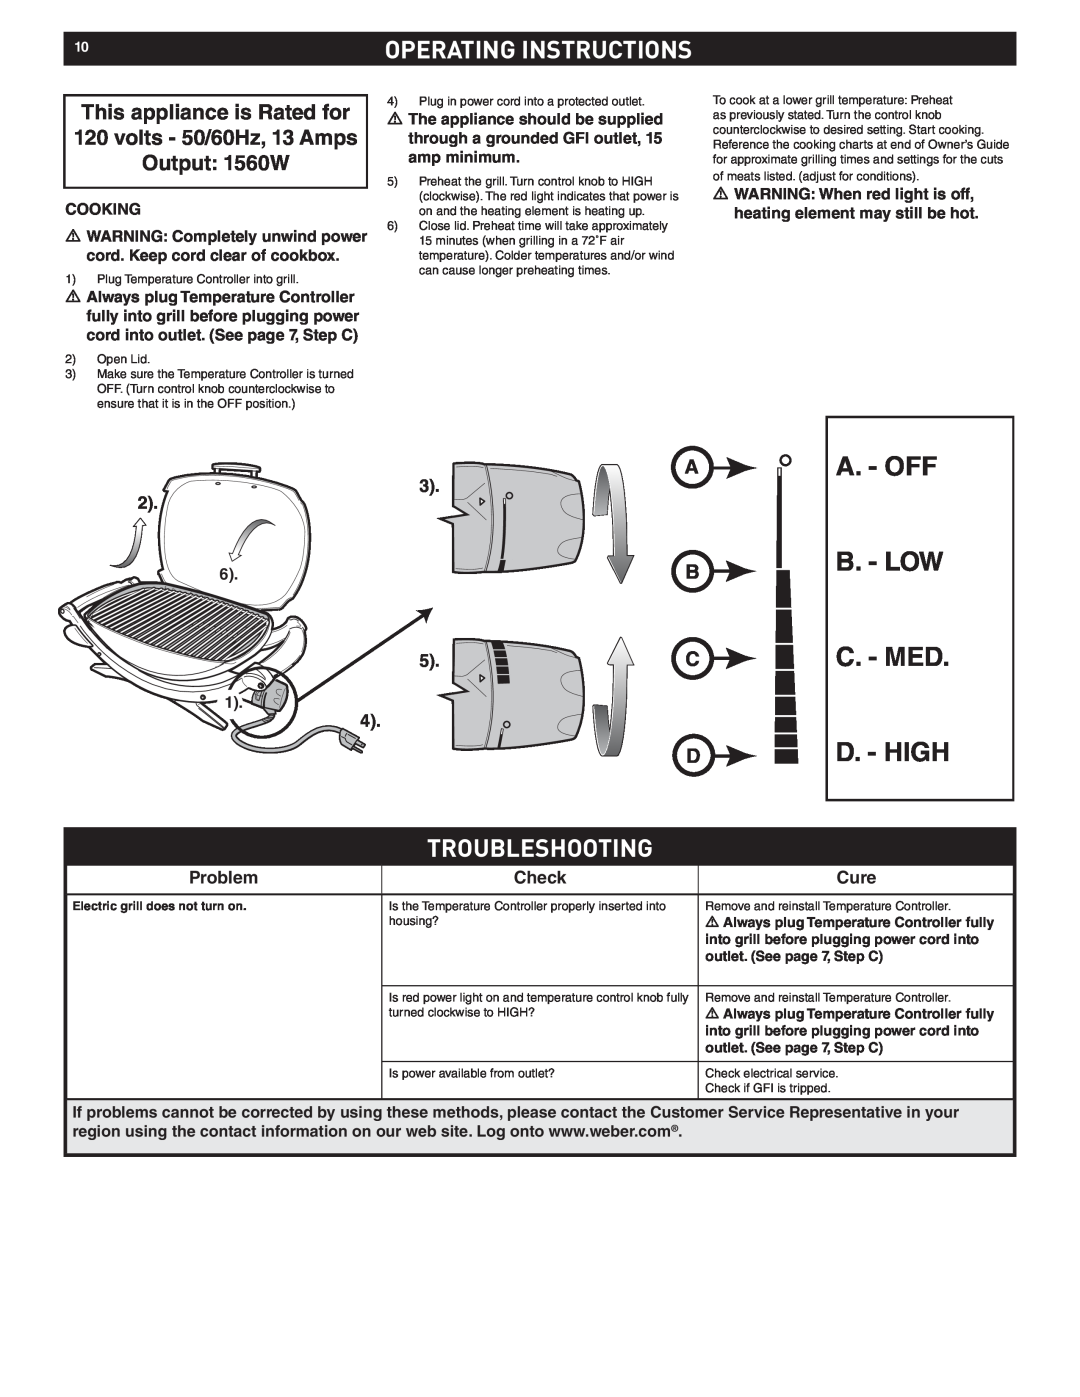 Weber Q 140 A. - Off B. - Low C. - Med D. - High, Operating Instructions, Troubleshooting, outlet. See page 7, Step C 